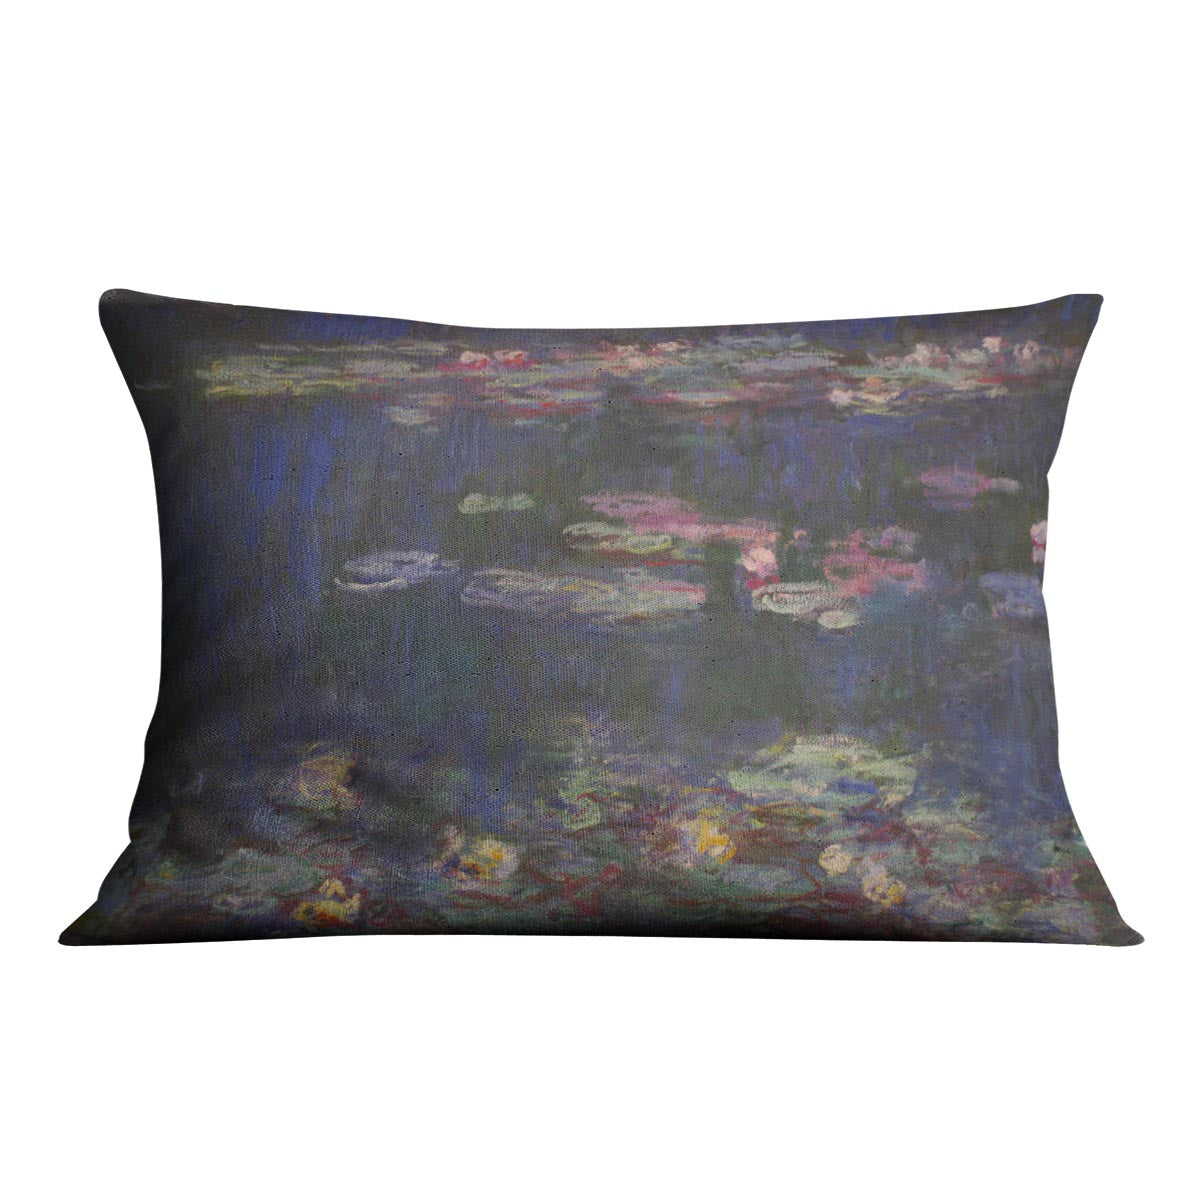 Water Lillies 11 by Monet Cushion